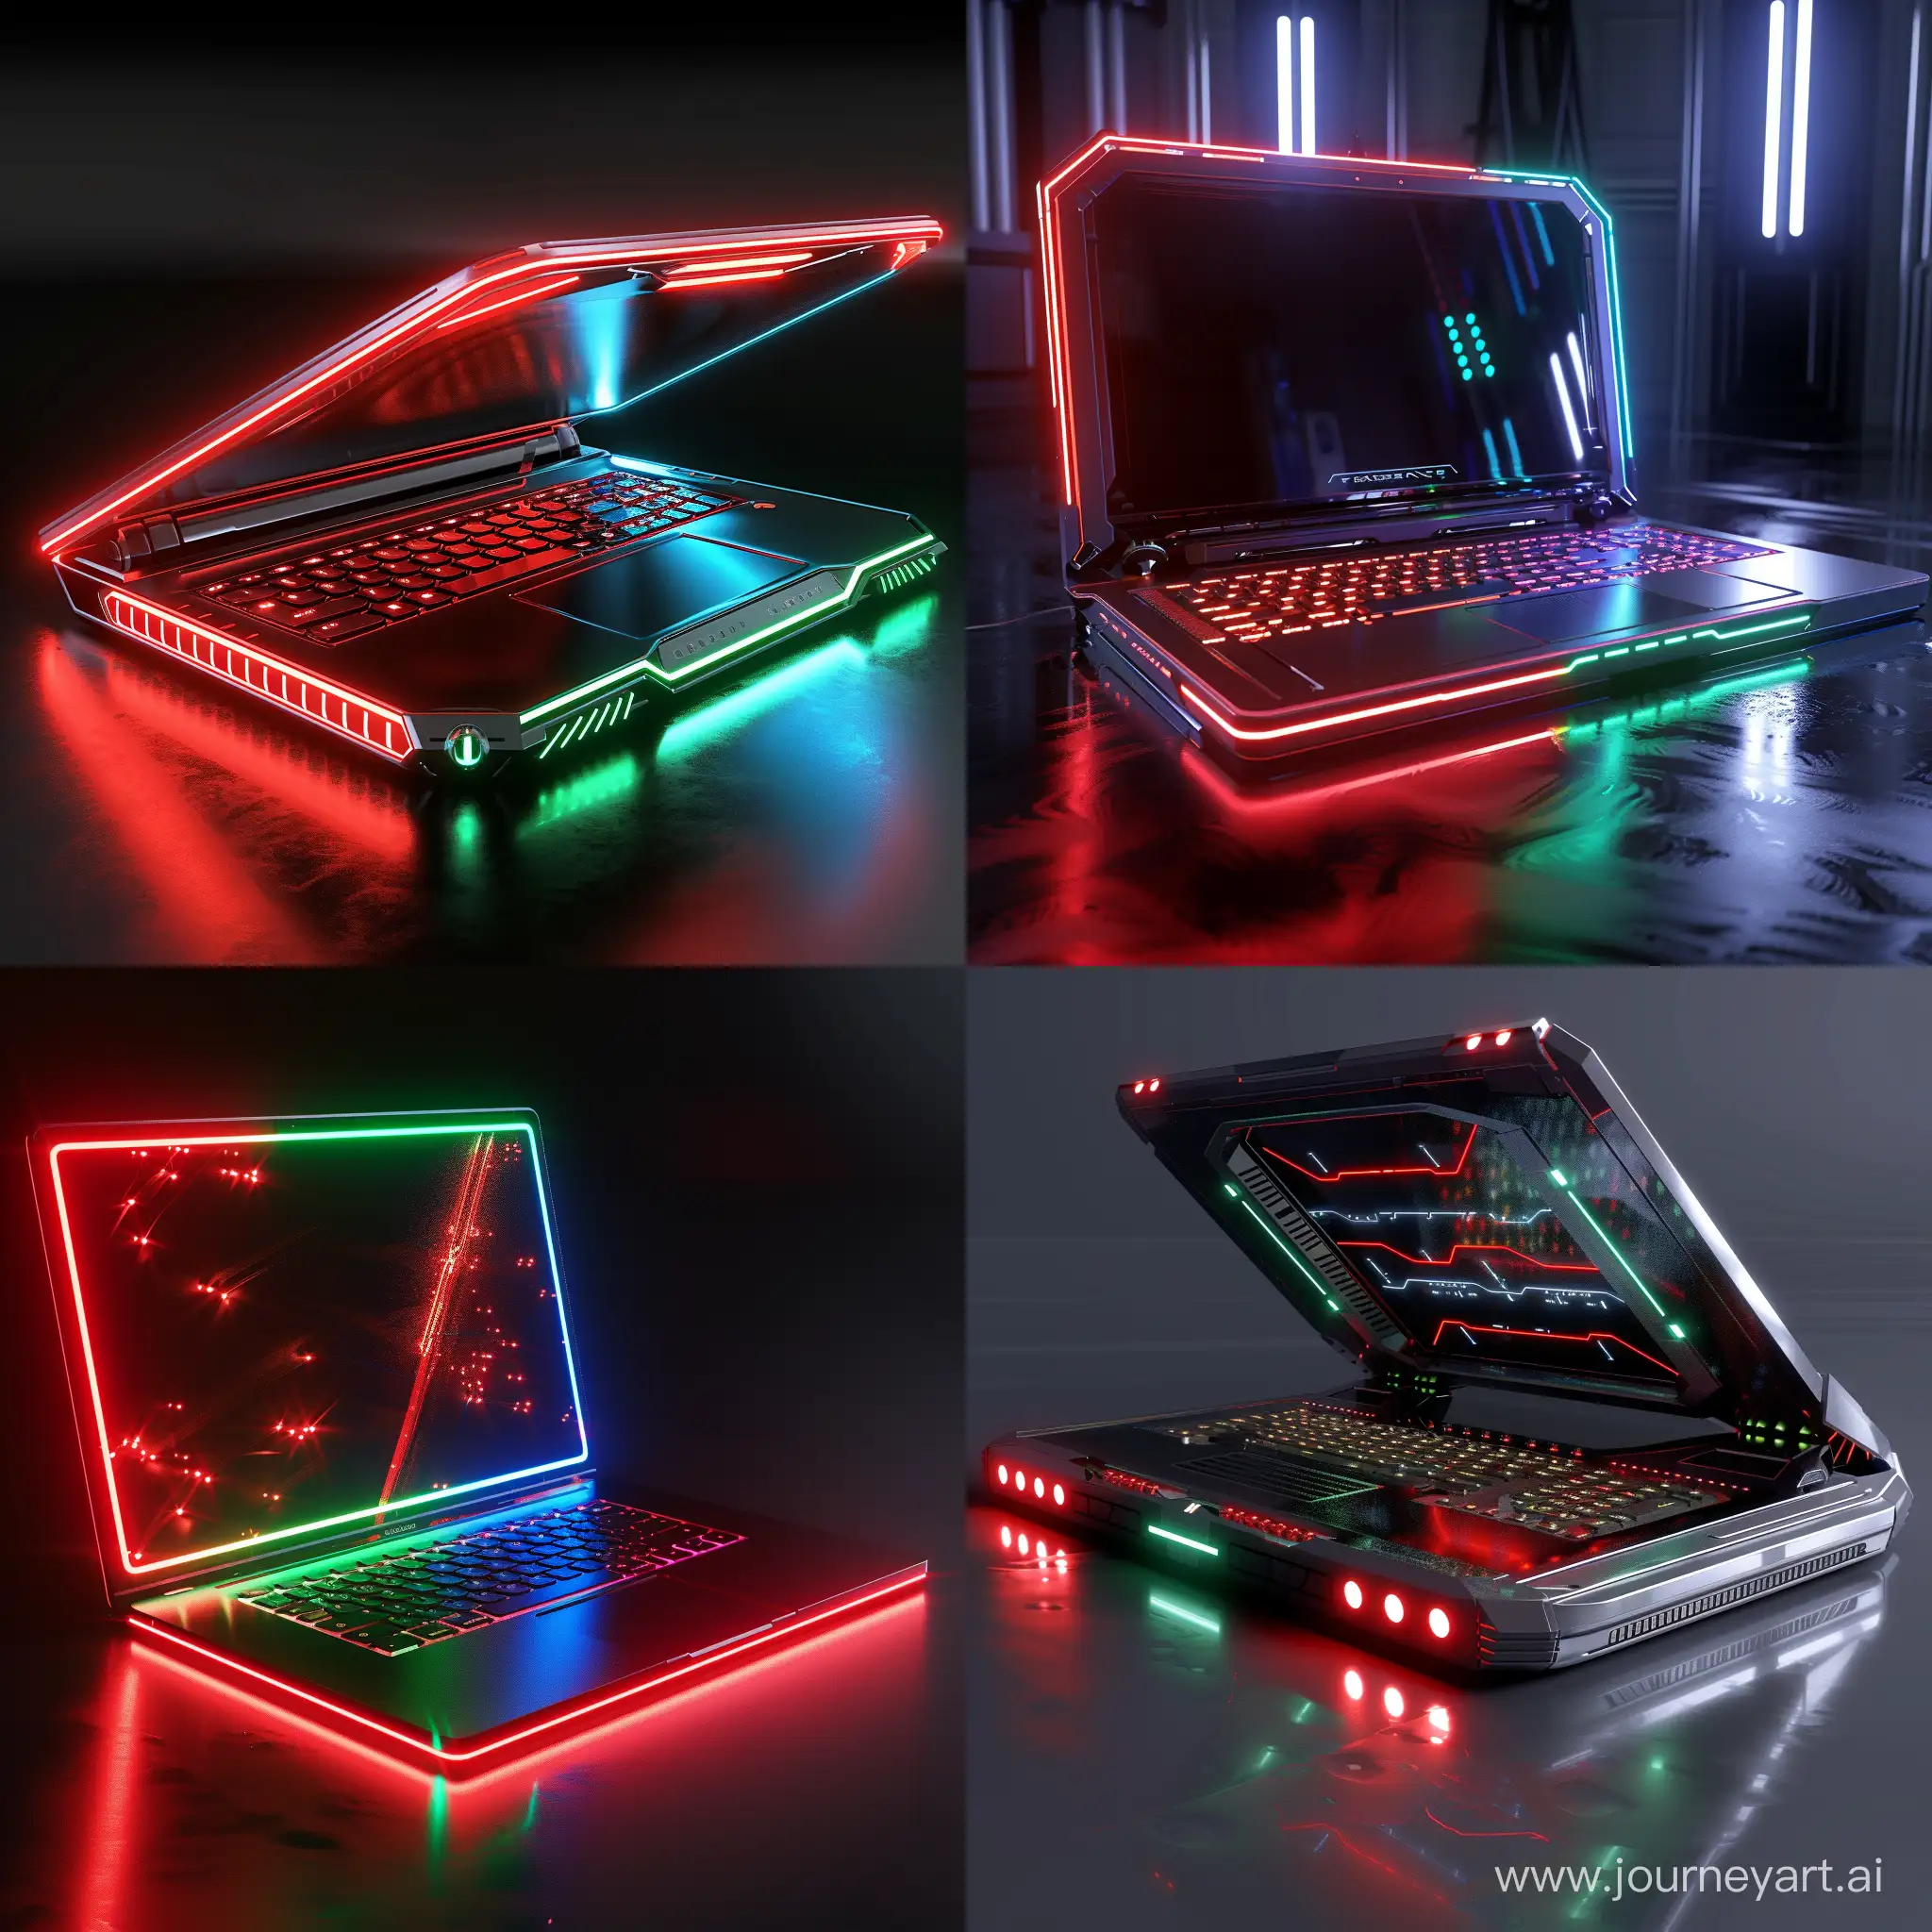 Futuristic-Laptop-with-Red-Green-and-Blue-PeLEDs